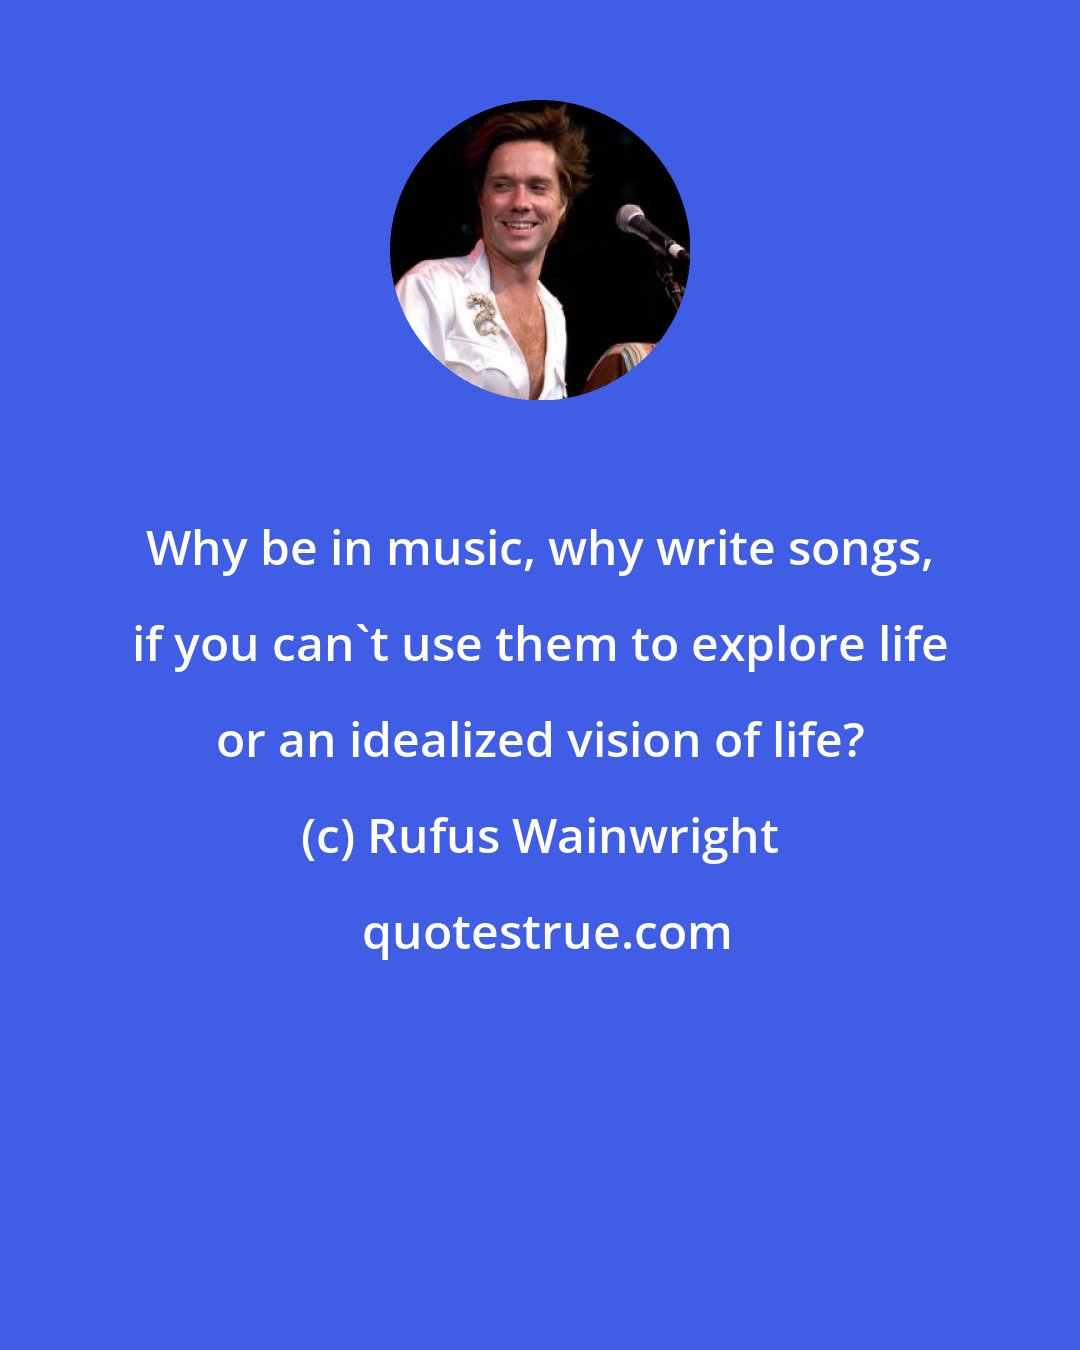 Rufus Wainwright: Why be in music, why write songs, if you can't use them to explore life or an idealized vision of life?